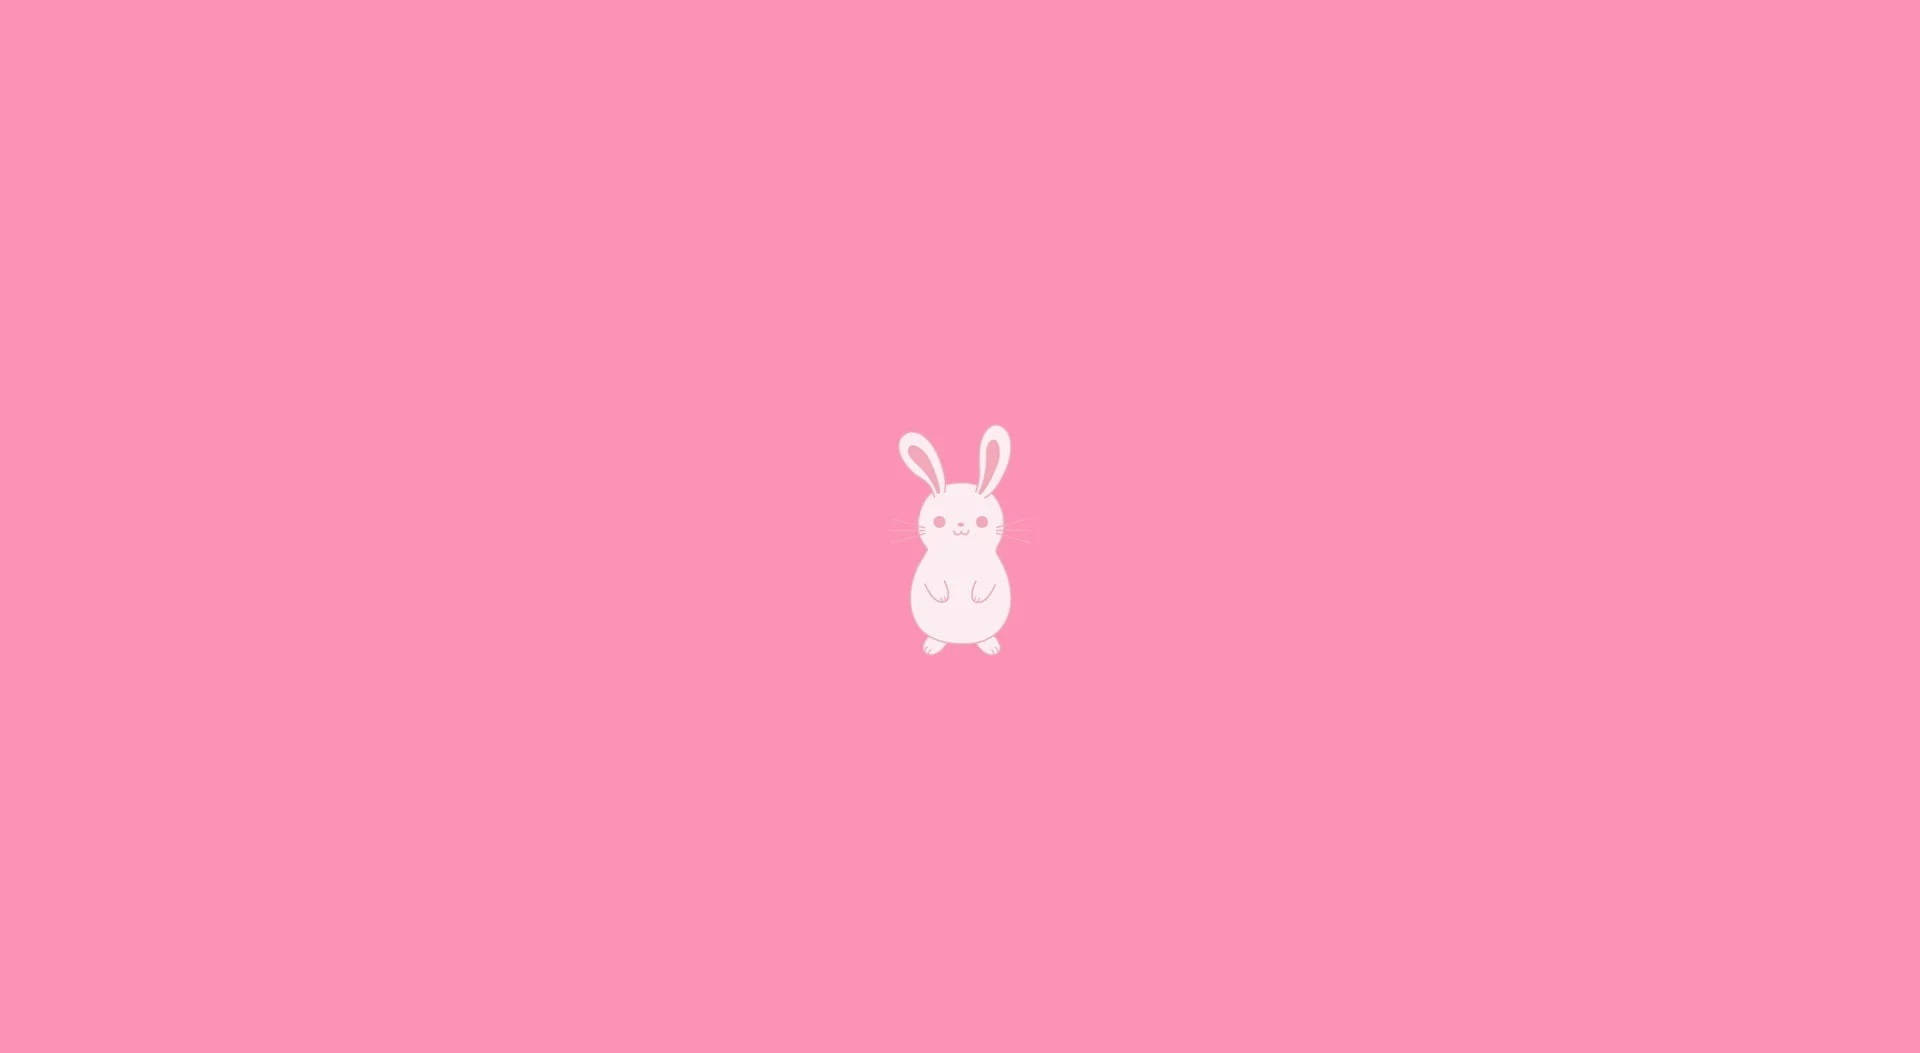 A White Rabbit On A Pink Background